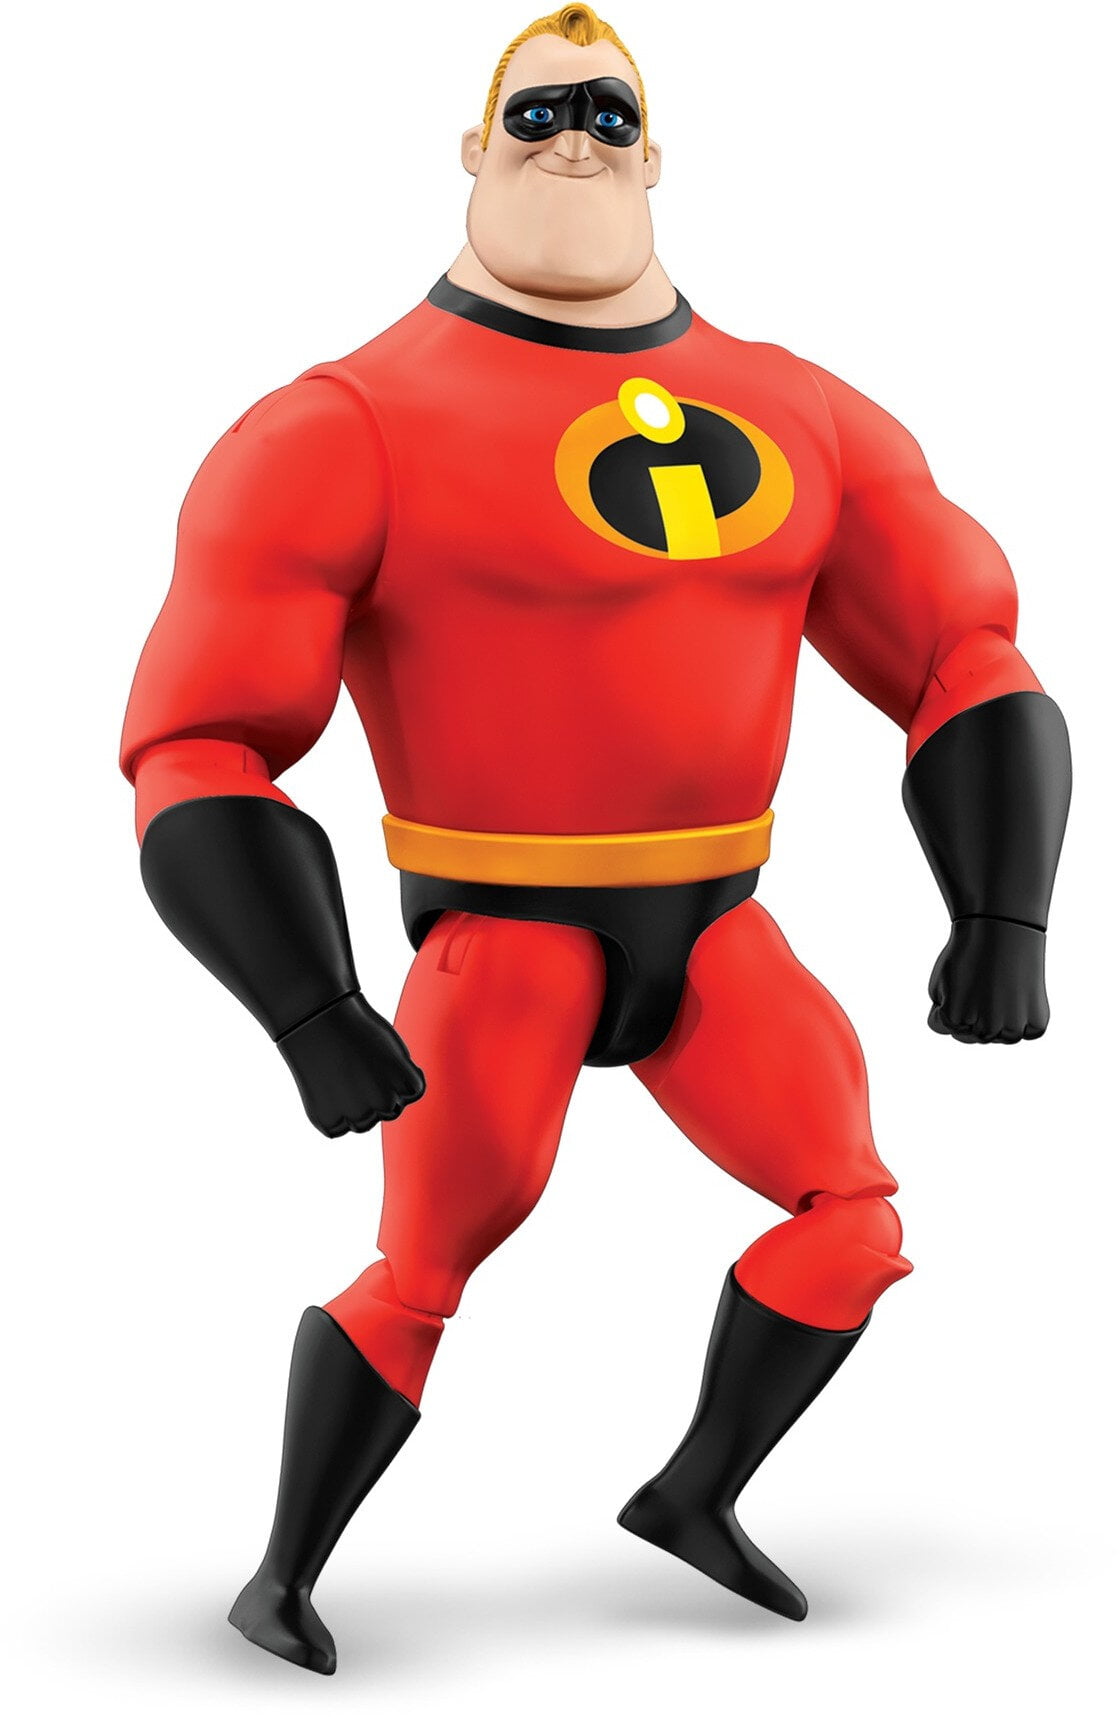 Incredible Light-Up Talking 12" Action Figure Incredibles 2 New Disney  Mr 